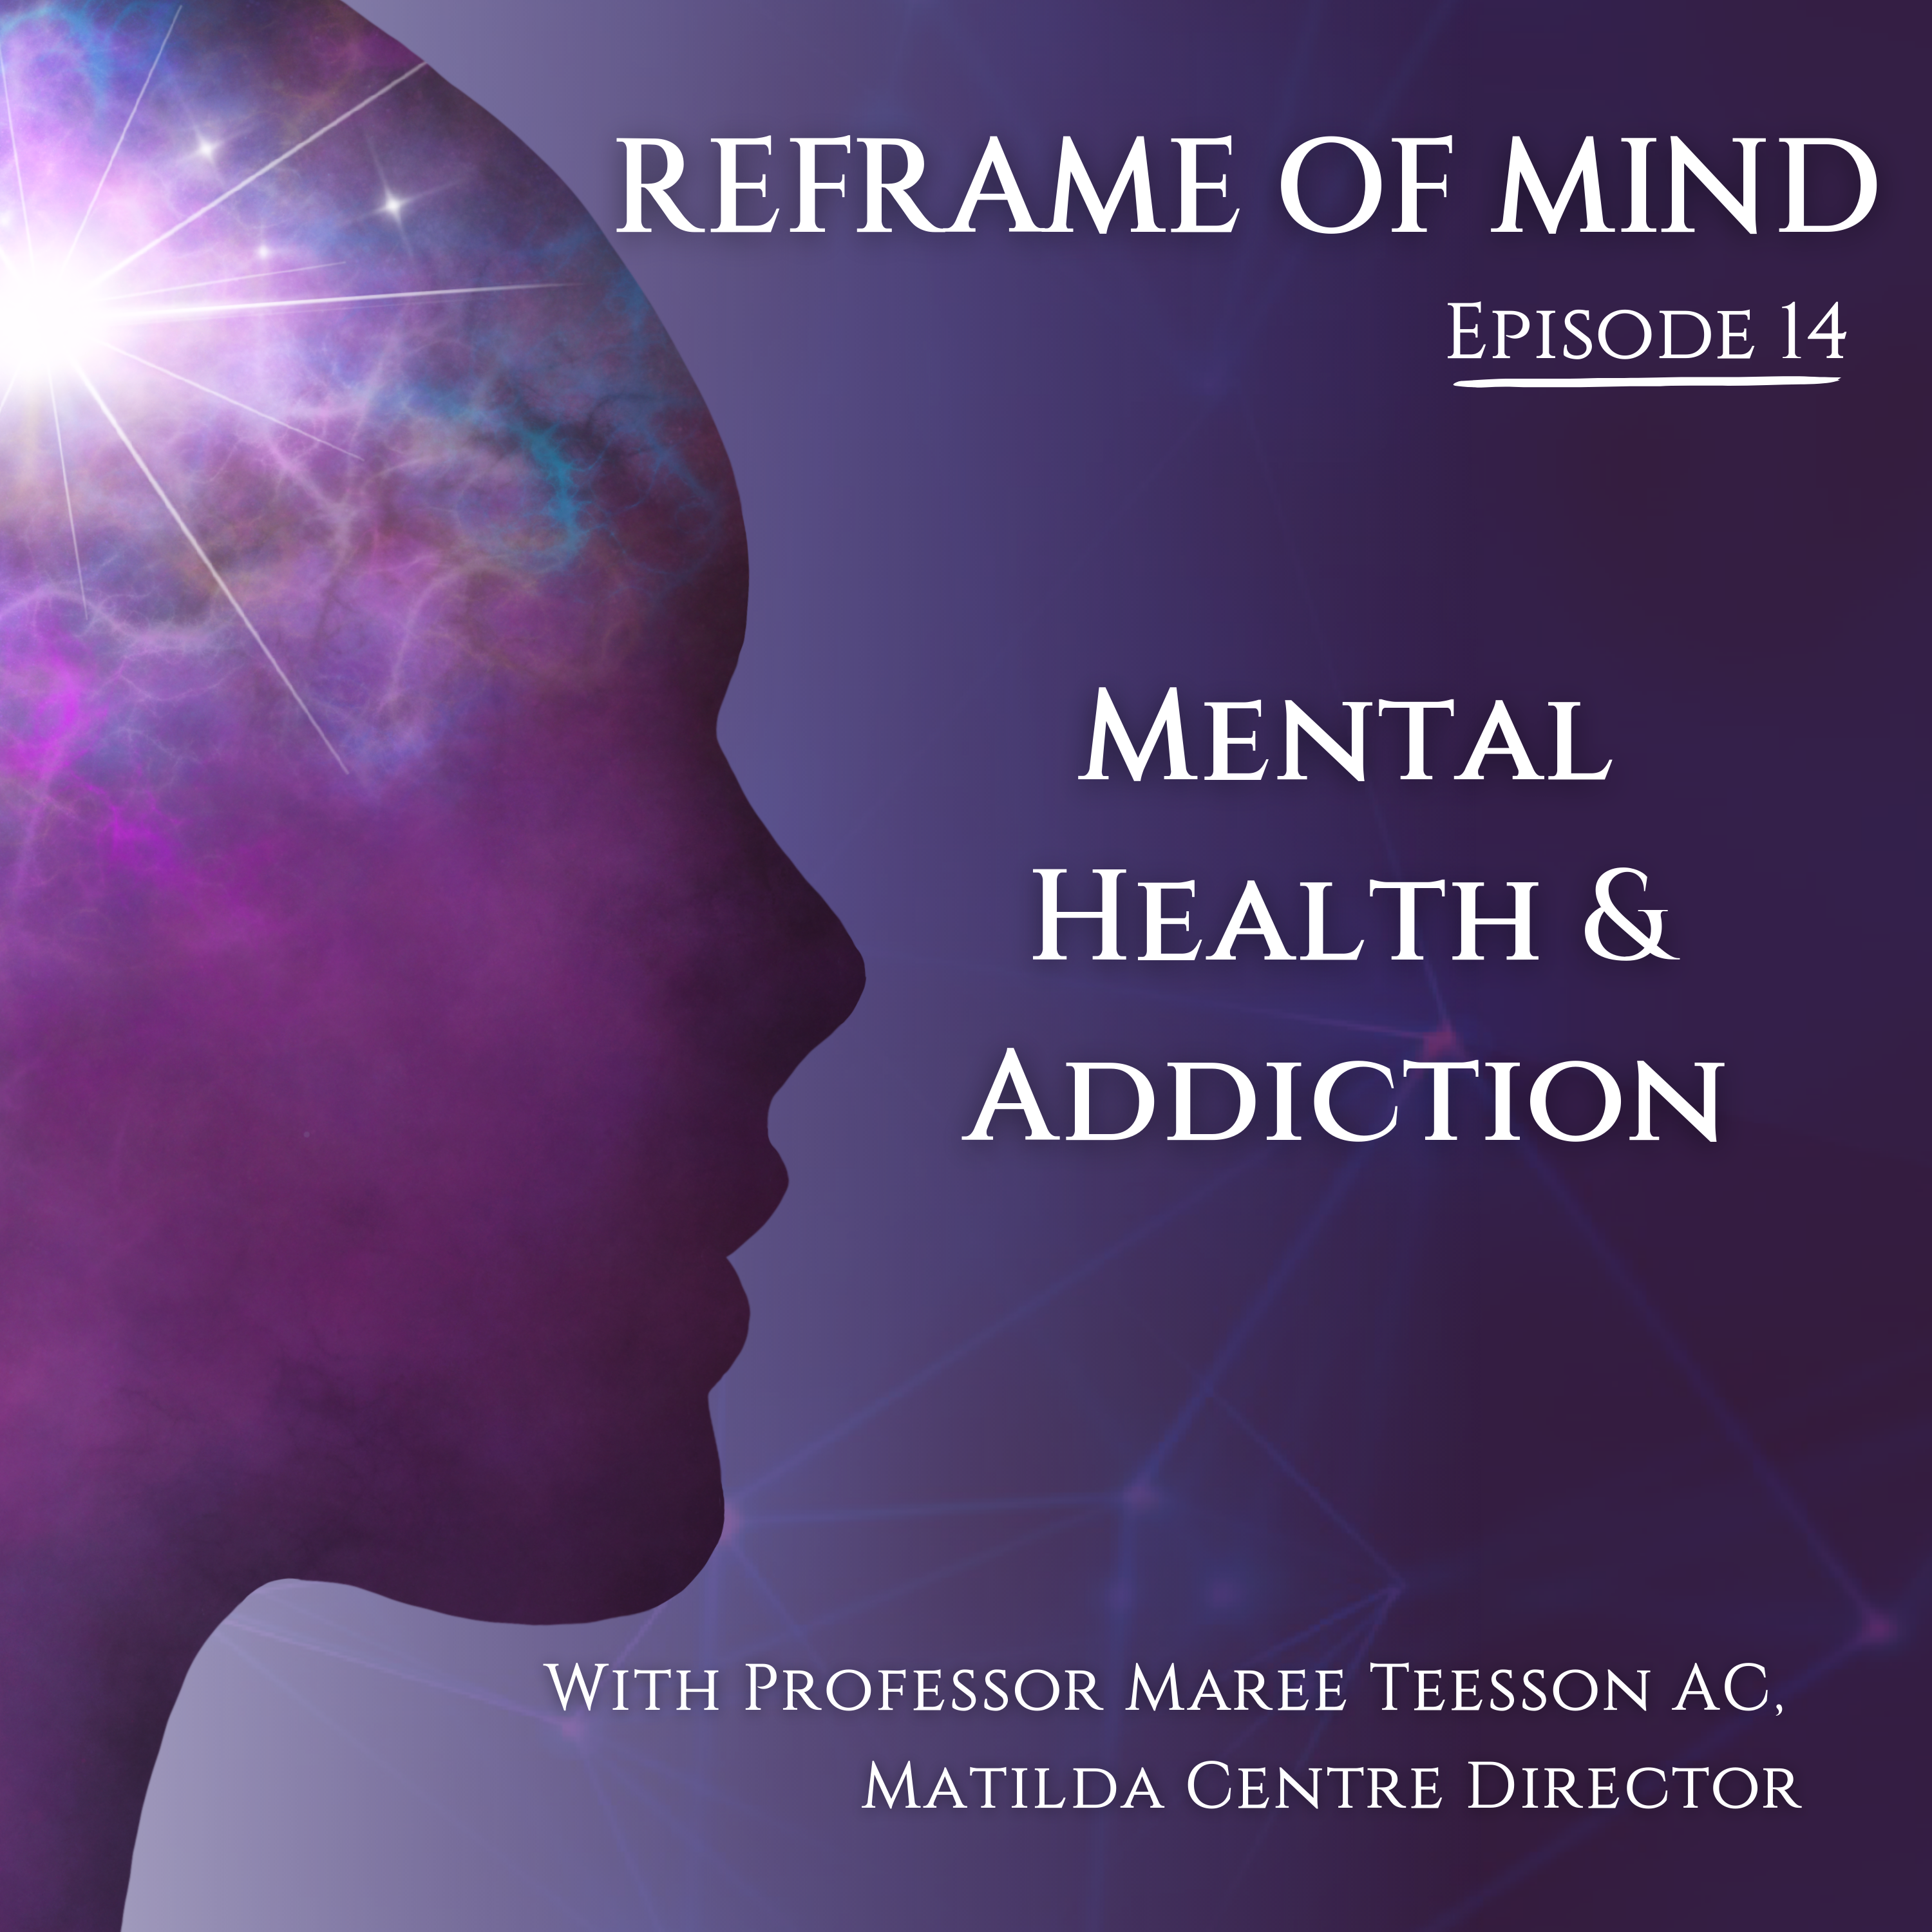 Episode 14: Mental Health and Addiction; featuring Professor Maree Teesson AC